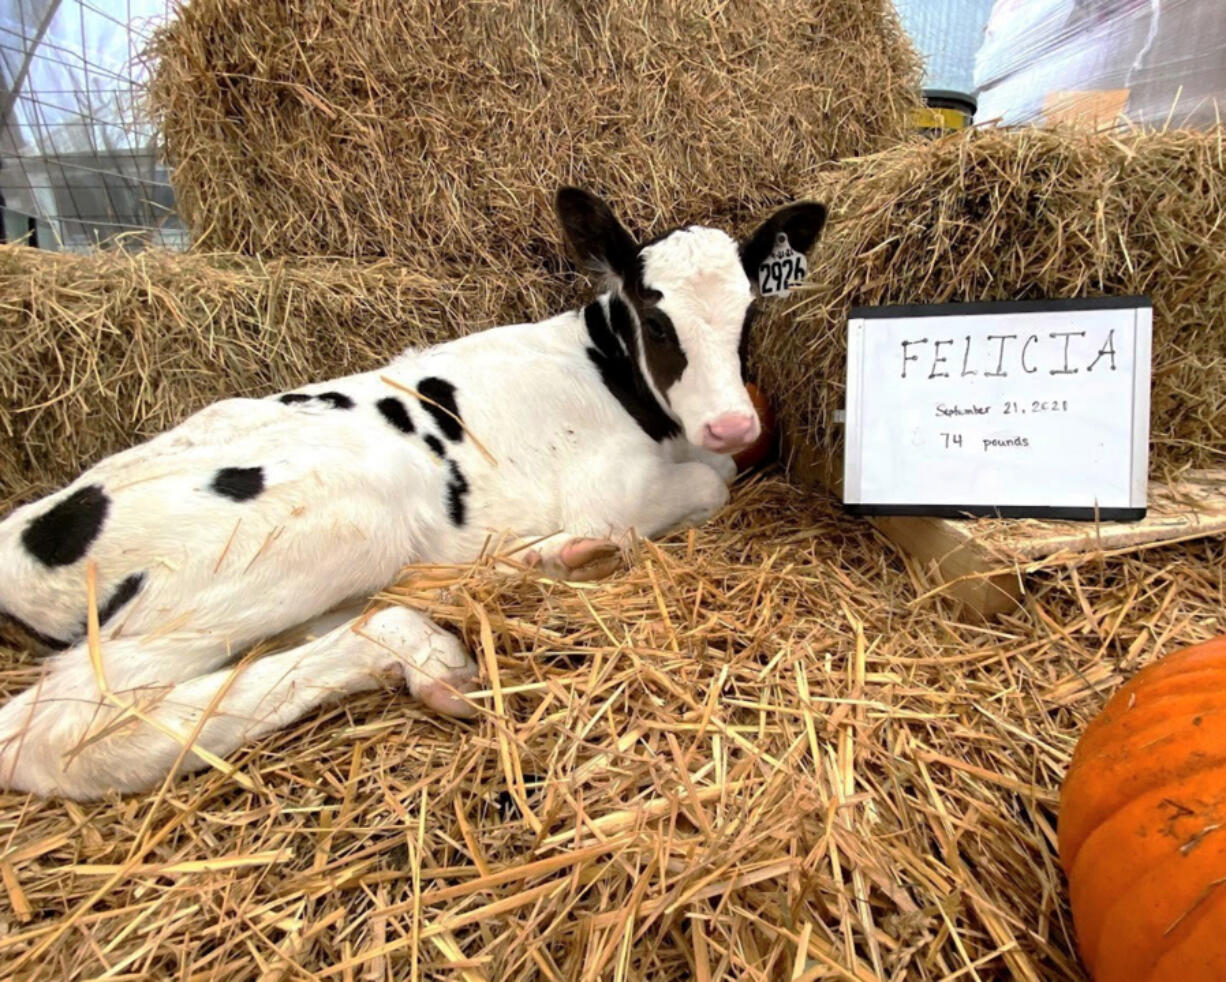 Felicia the calf was born Sept. 21 at Groeneveld Family Farm in Monroe, Ore., and recently adopted by Gause Elementary School first-graders as part of the Discover Dairy Adopt a Calf program.